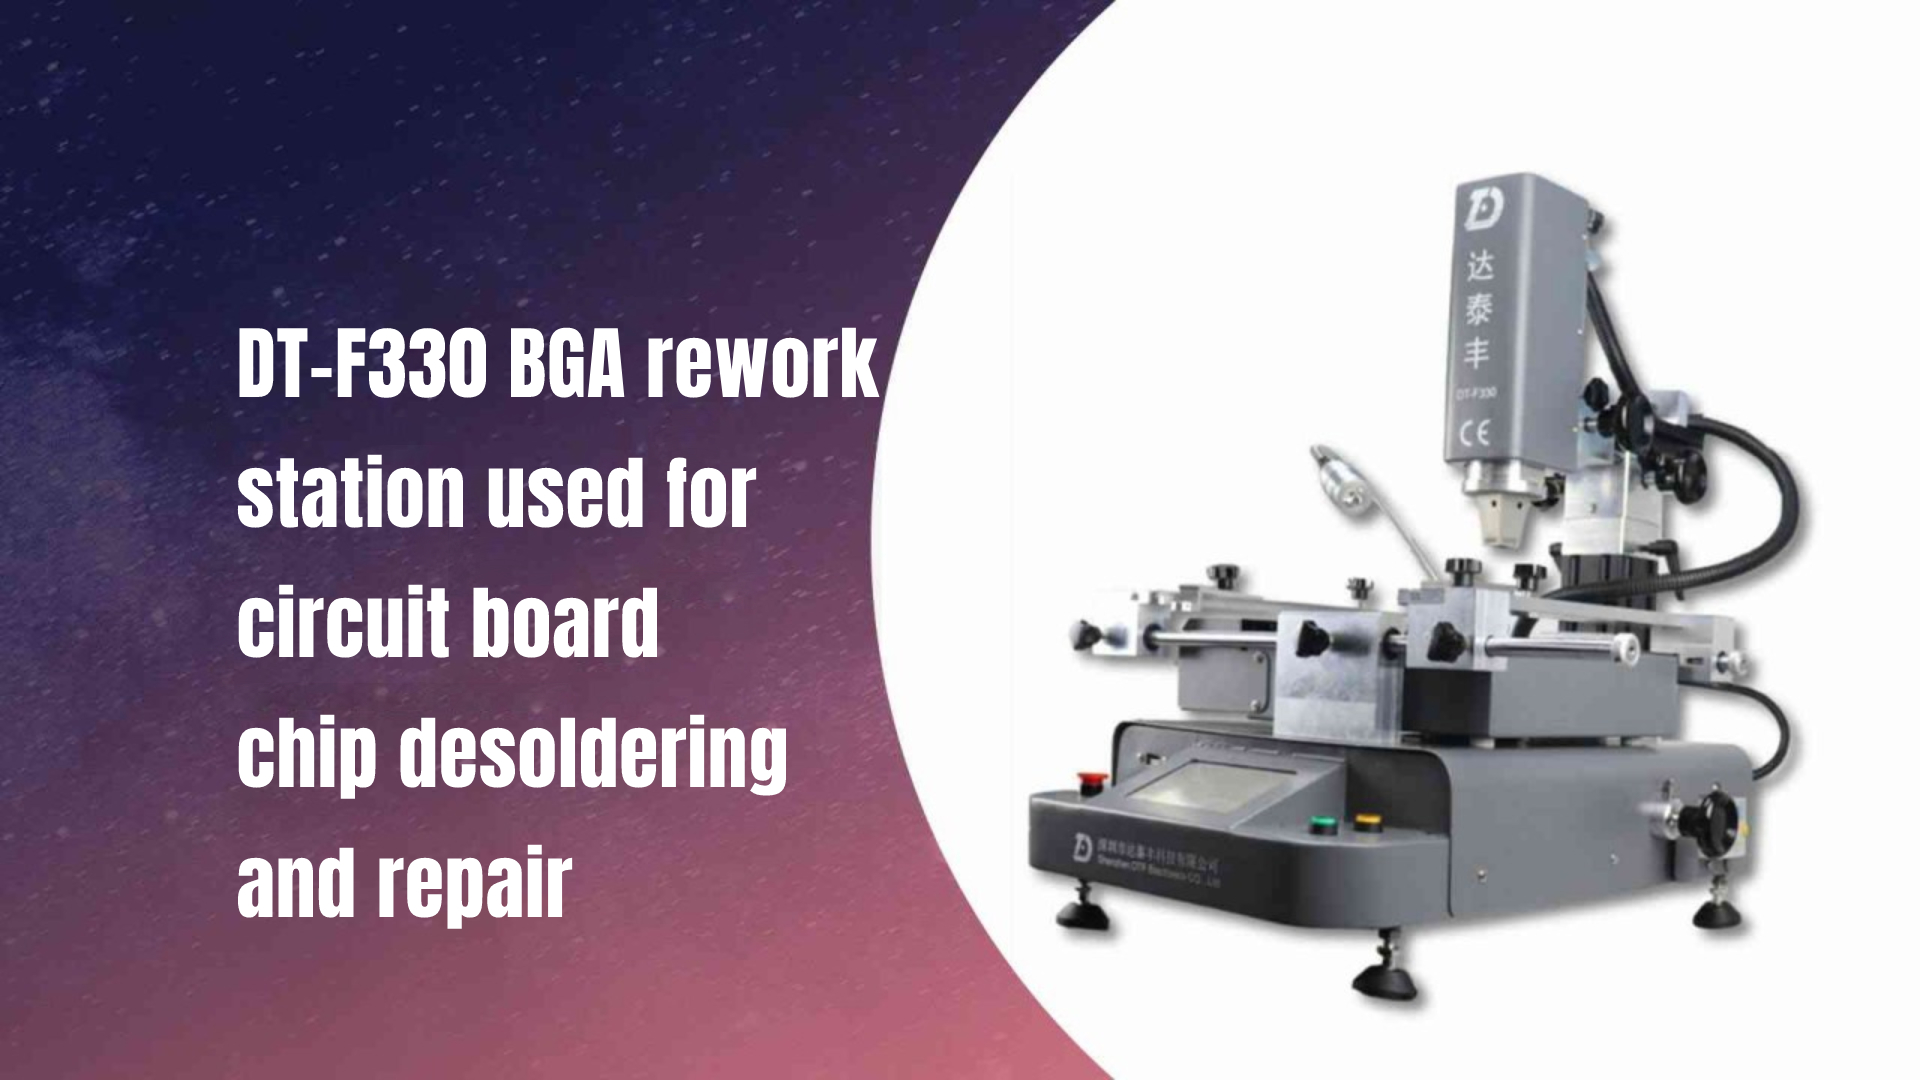 DT-F330 BGA rework station used for circuit board chip desoldering and repair